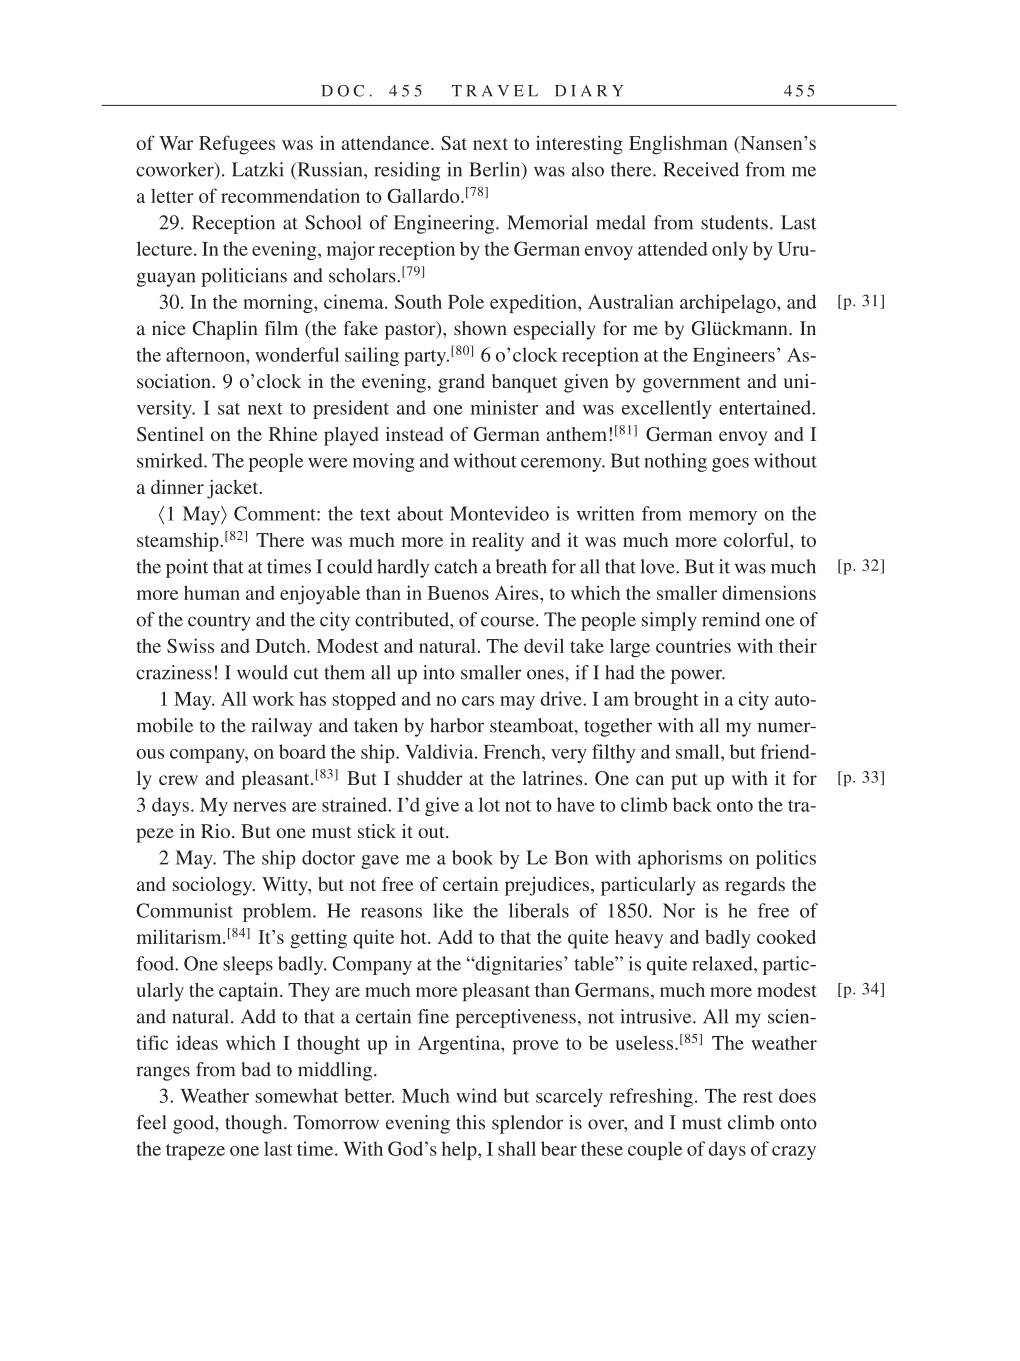 Volume 14: The Berlin Years: Writings & Correspondence, April 1923-May 1925 (English Translation Supplement) page 455